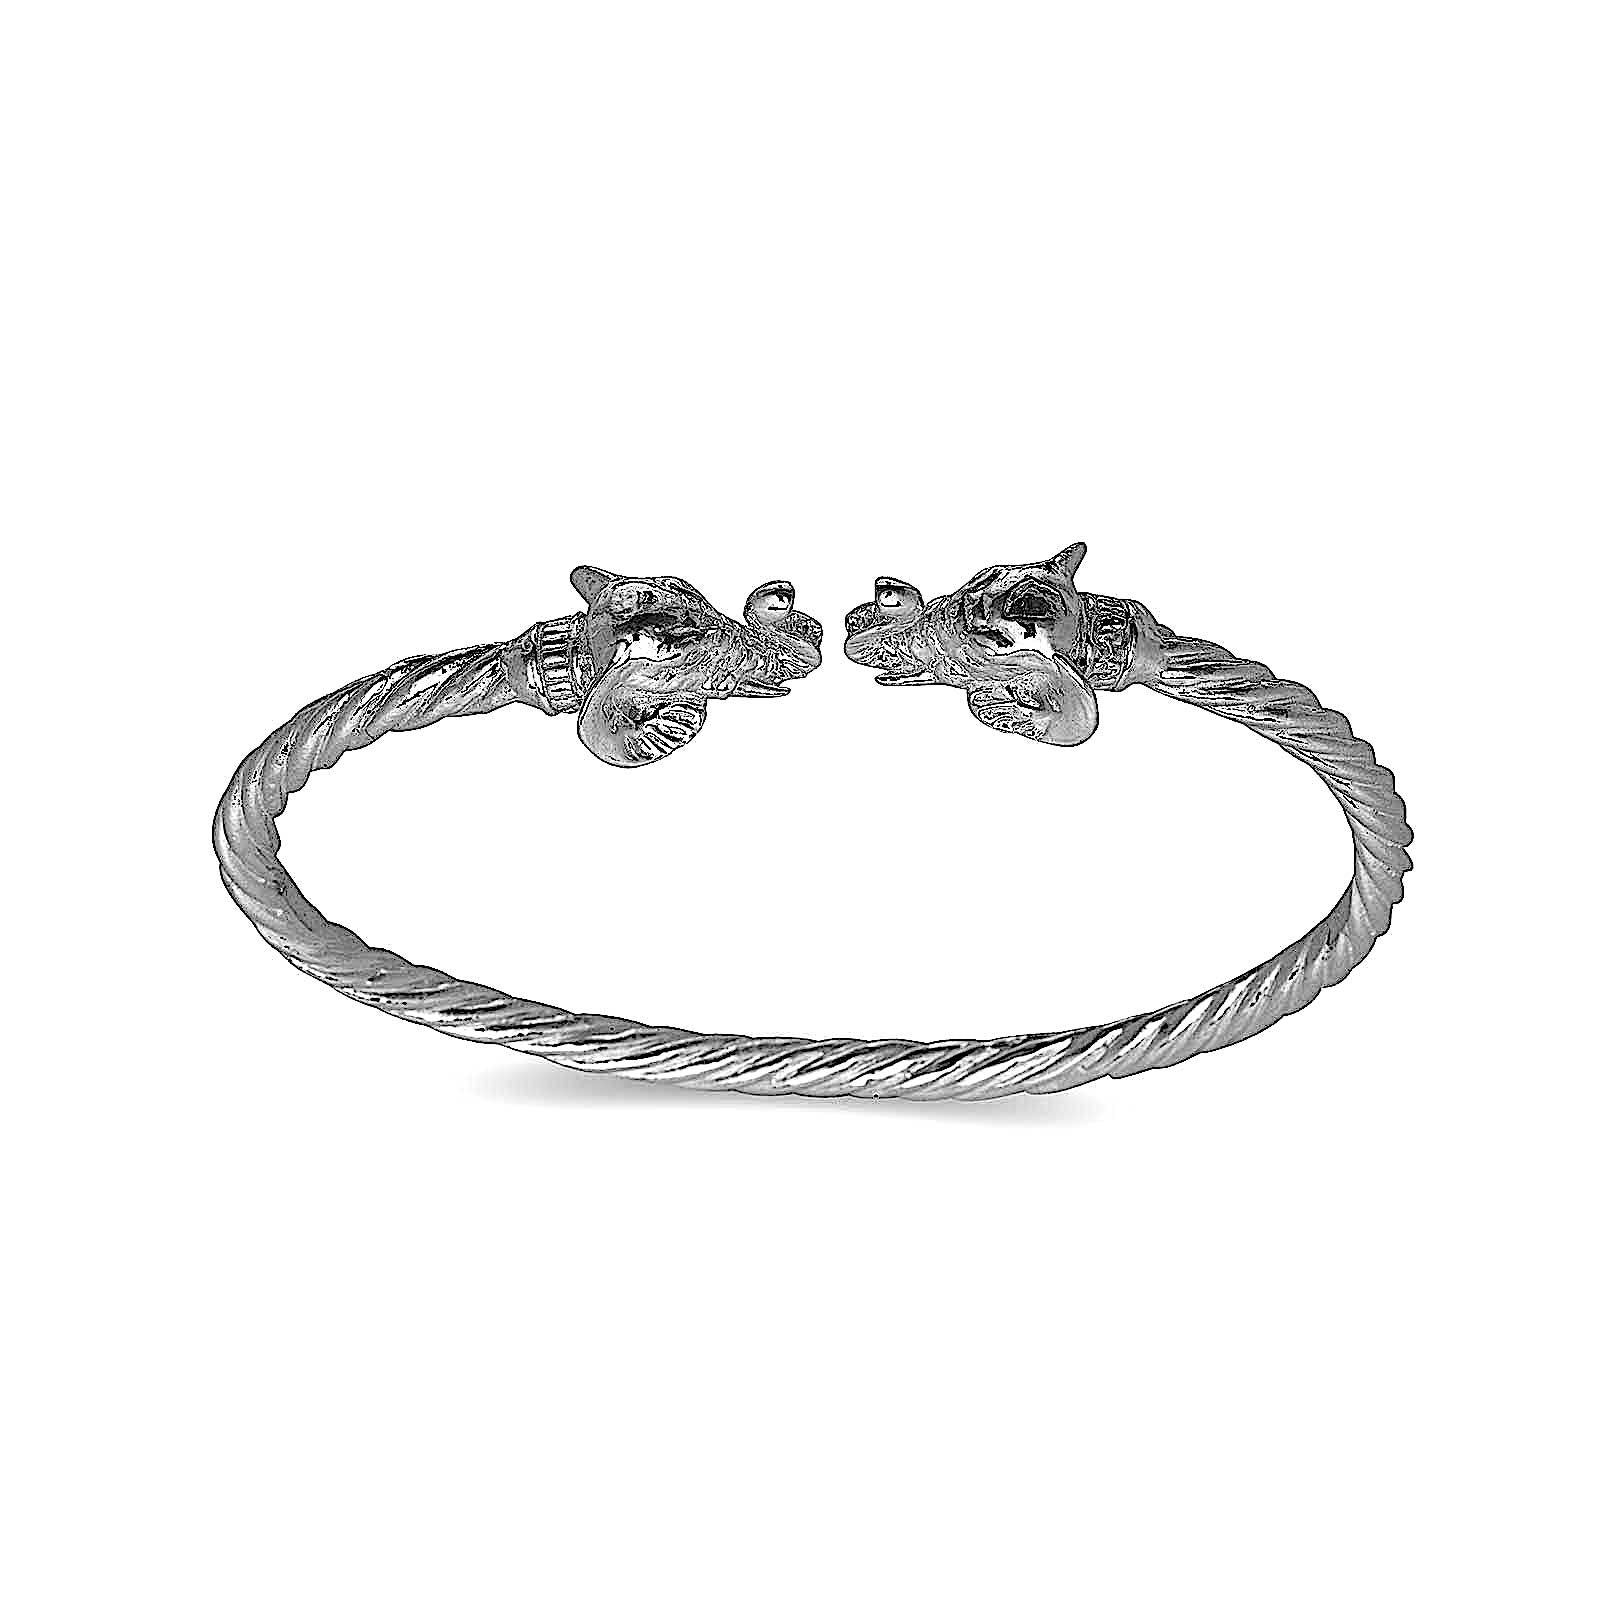 Elephant ends coiled rope West Indian bangle .925 Sterling silver (MADE IN USA) - Betterjewelry